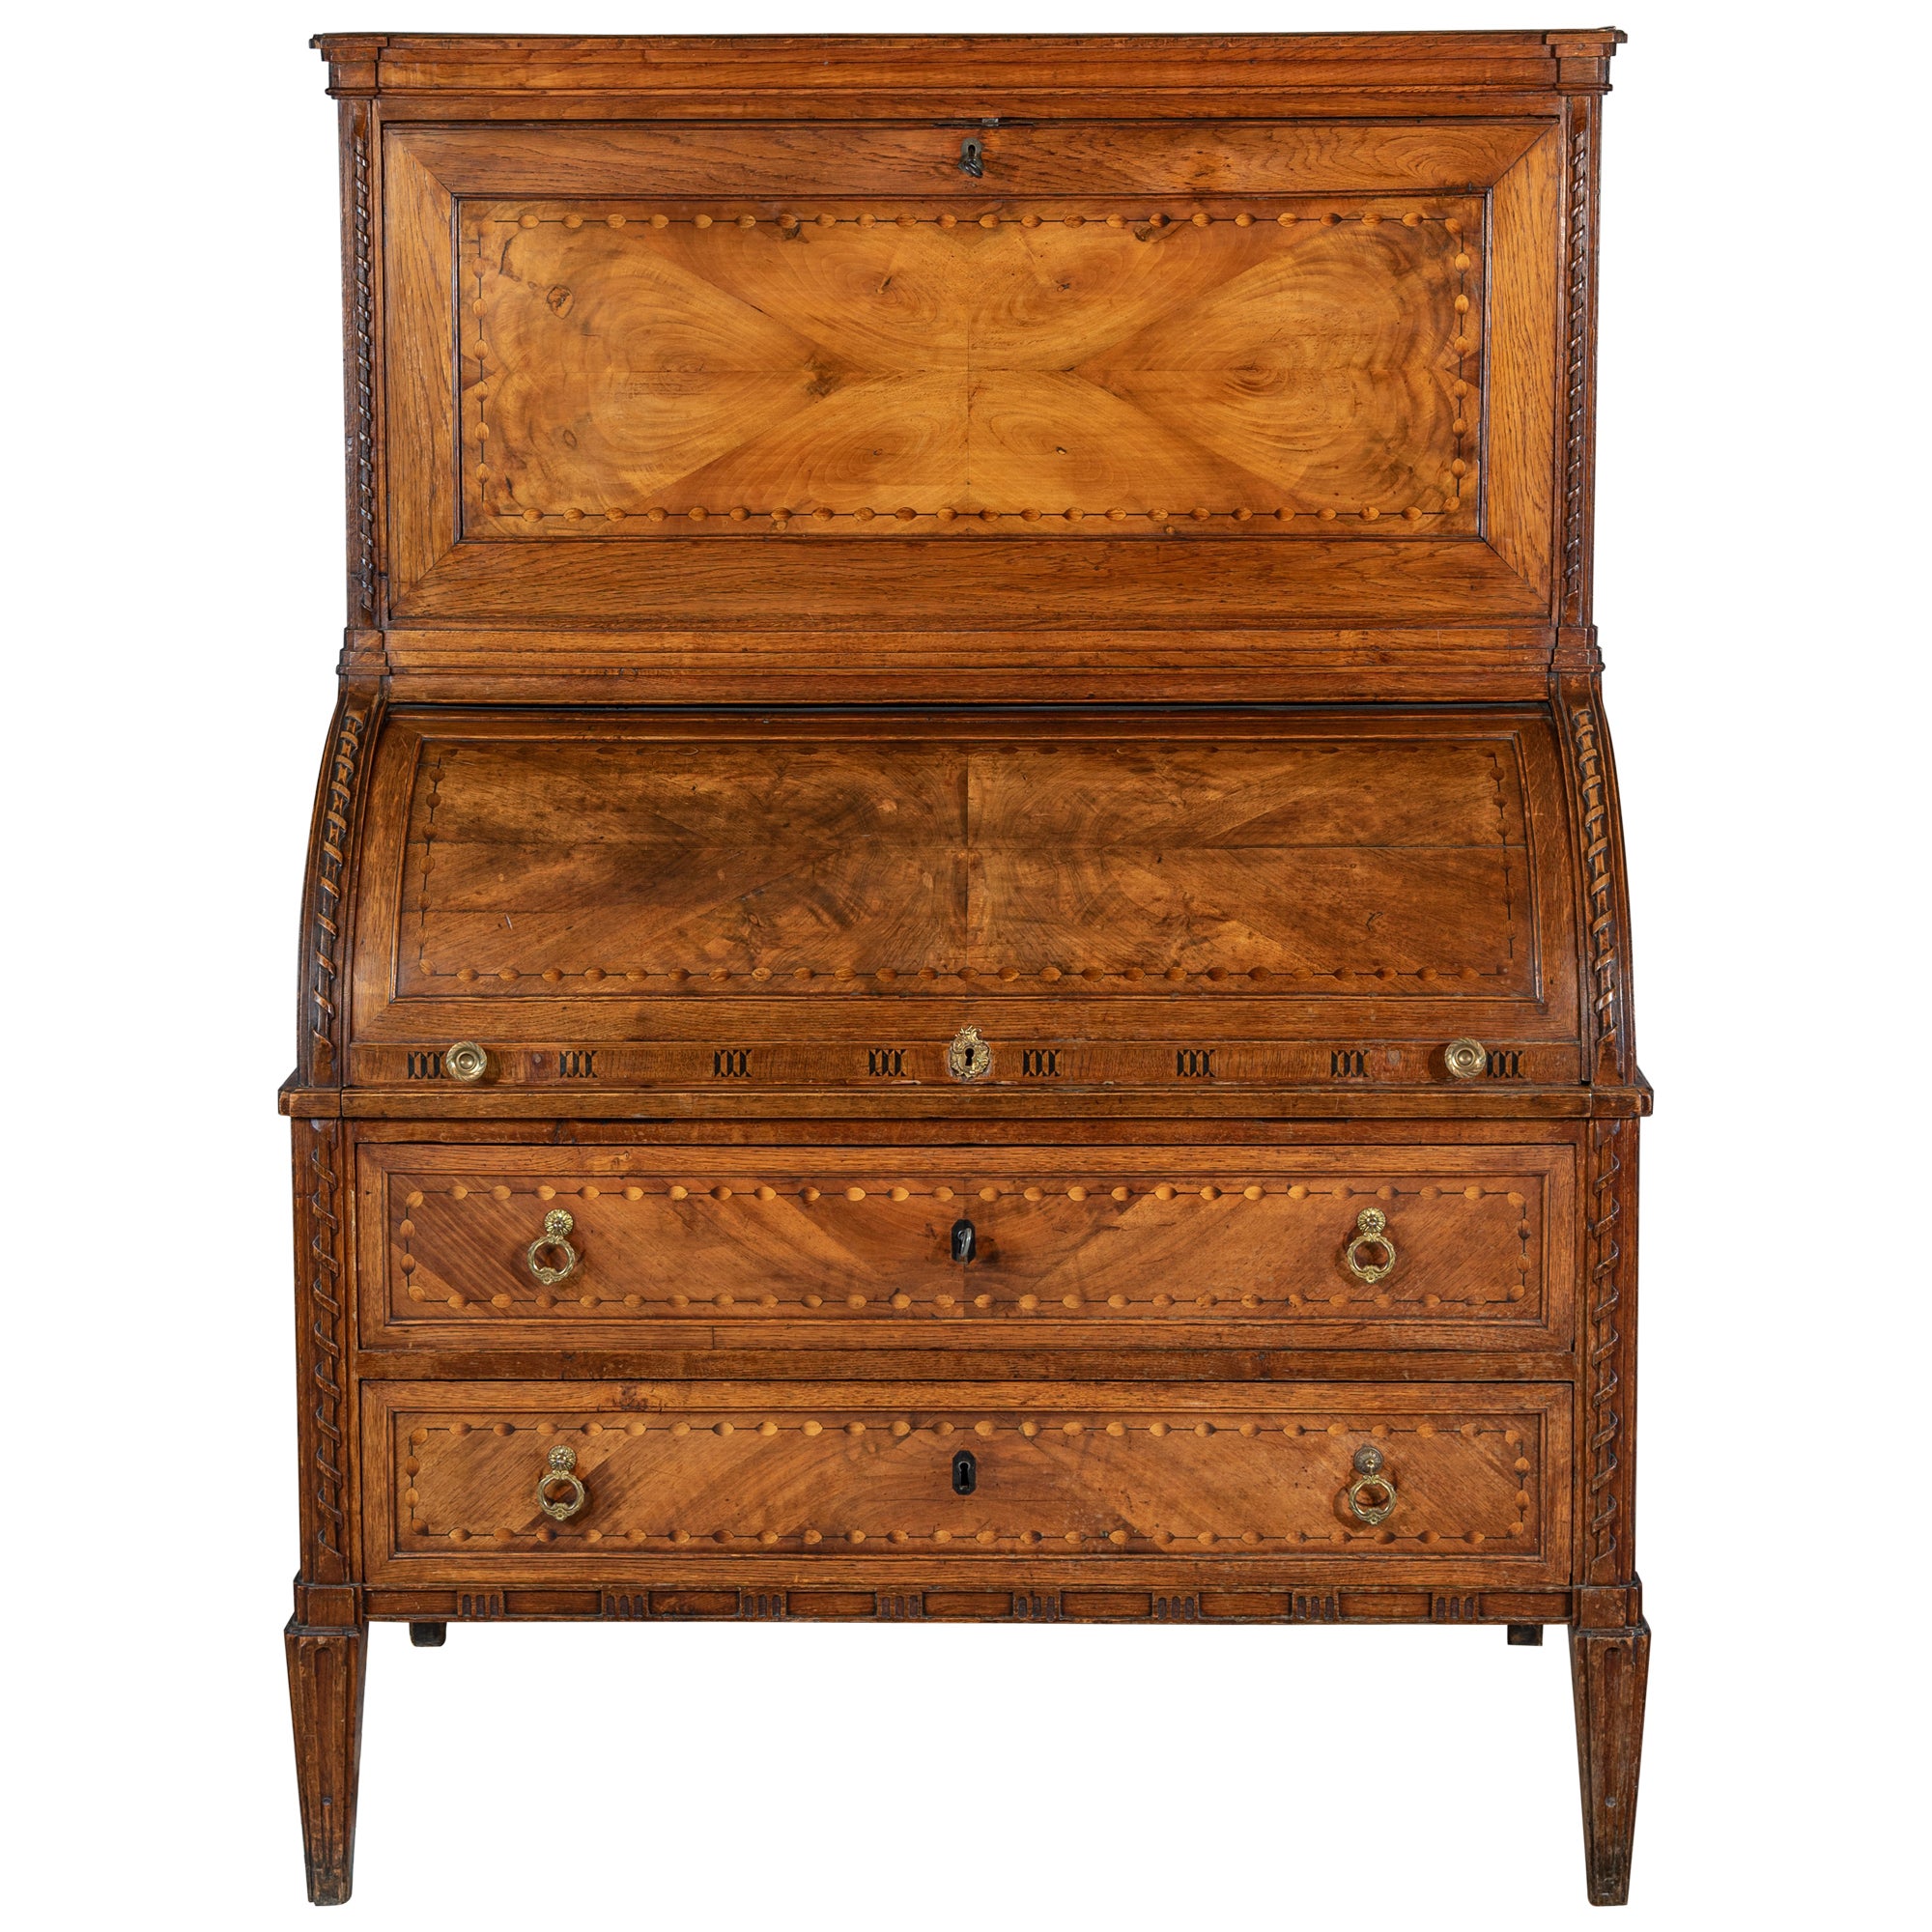 French 18th Century Louis XVI Period Marquetry Desk